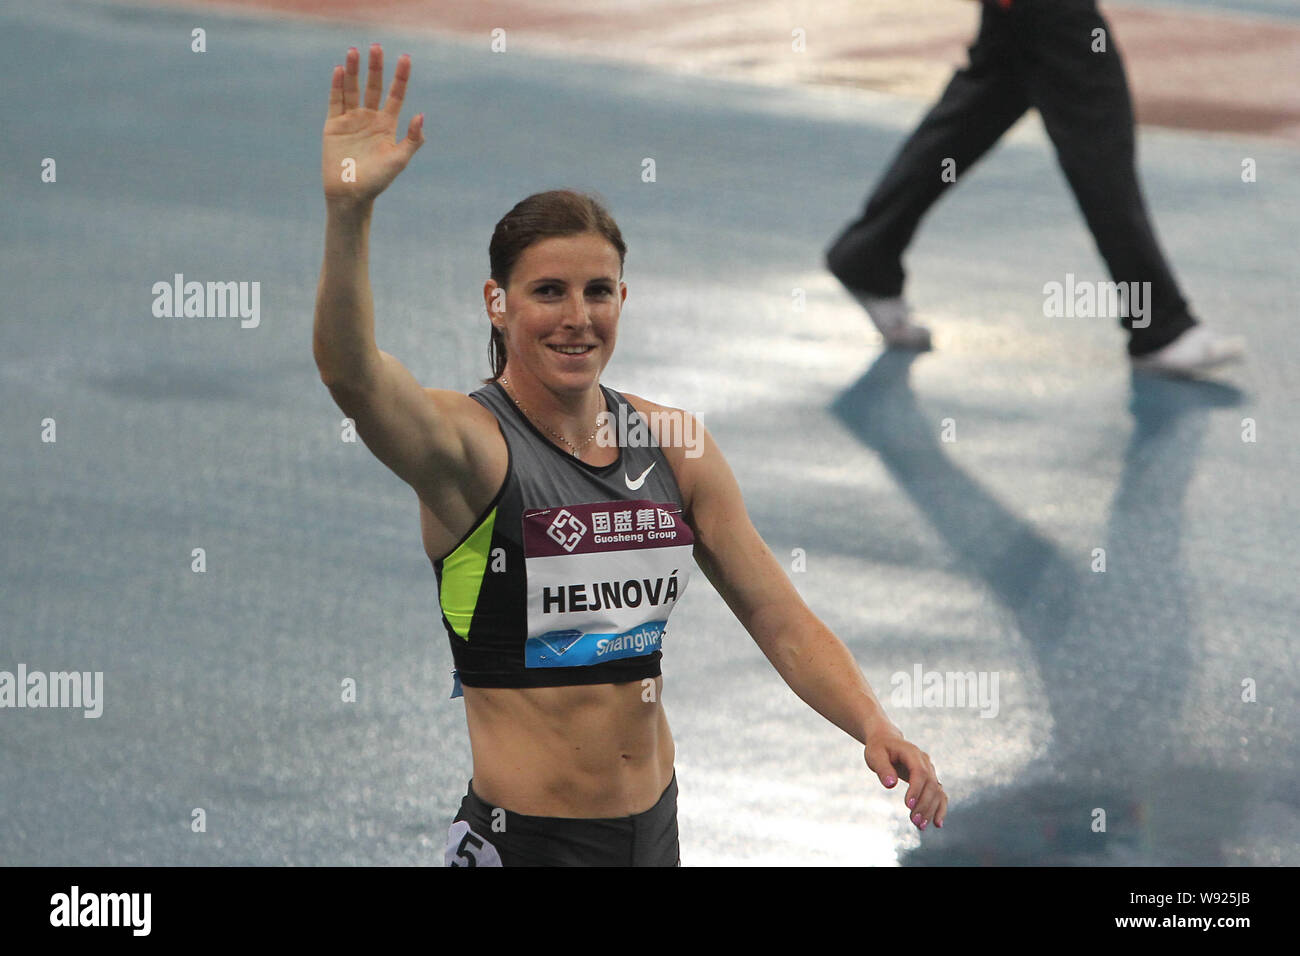 Zuzana Hejnova of The Czech Republic waves to the spectators after winning the womens 400m hurdles event at the 2013 IAAF Diamond League in Shanghai, Stock Photo